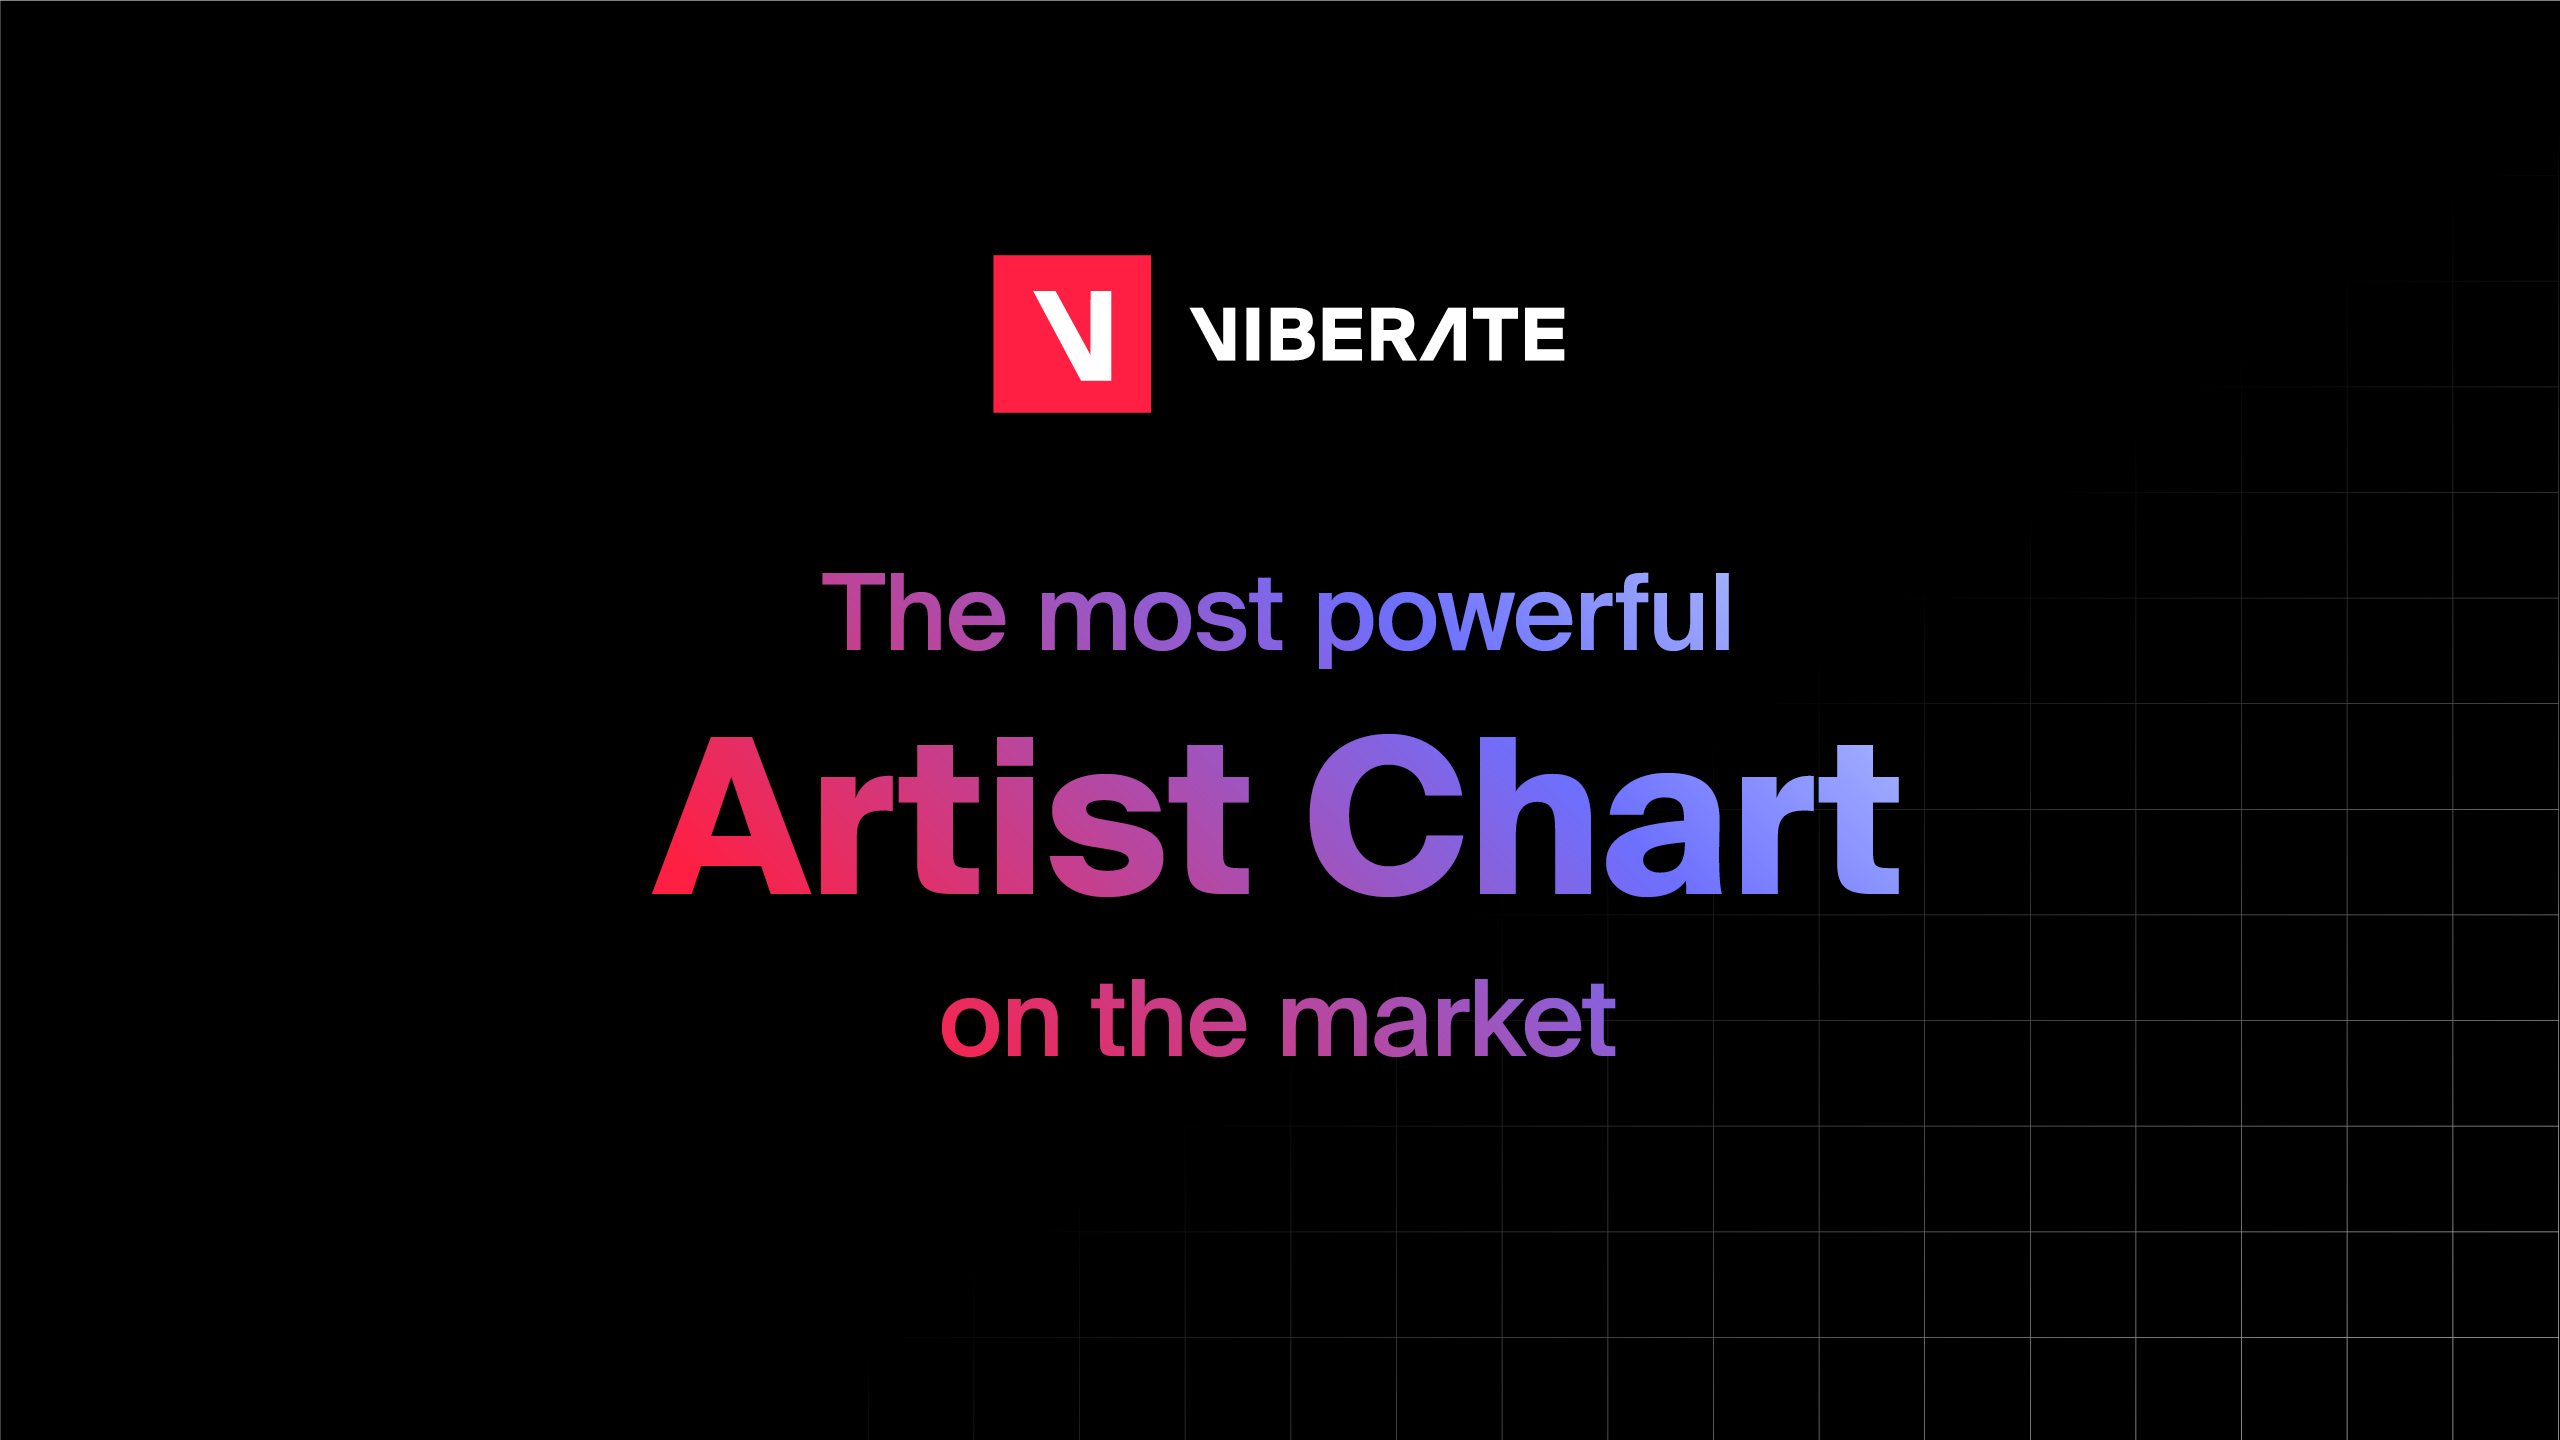  Have You Explored the Artist Chart Yet?